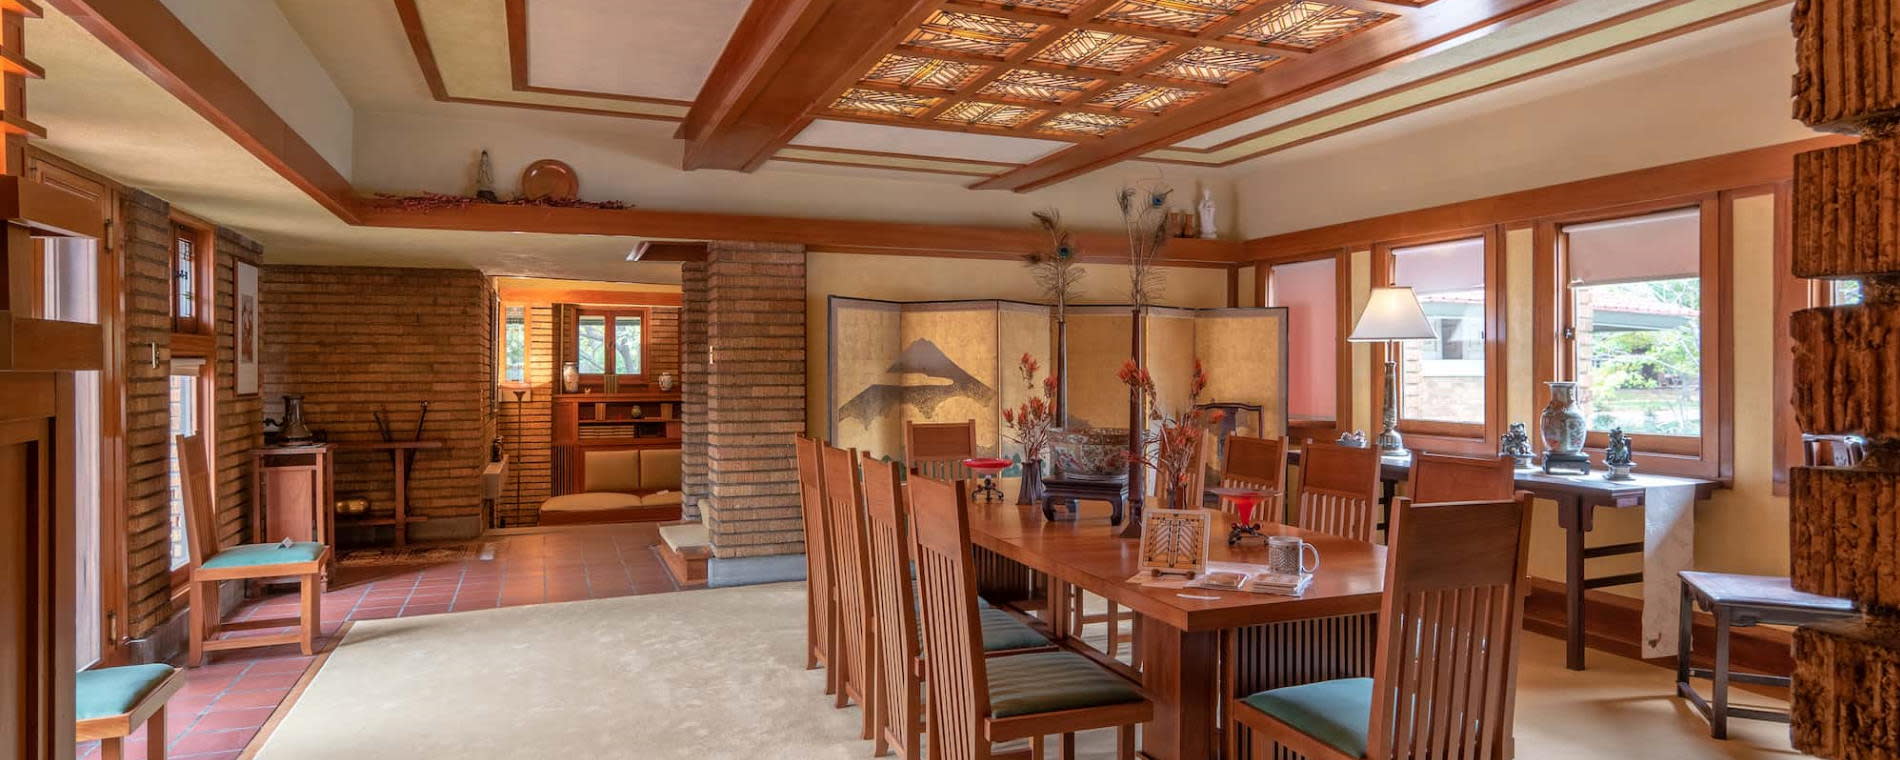 Dining Room at Frank Lloyd Wright's Allen House in Wichita